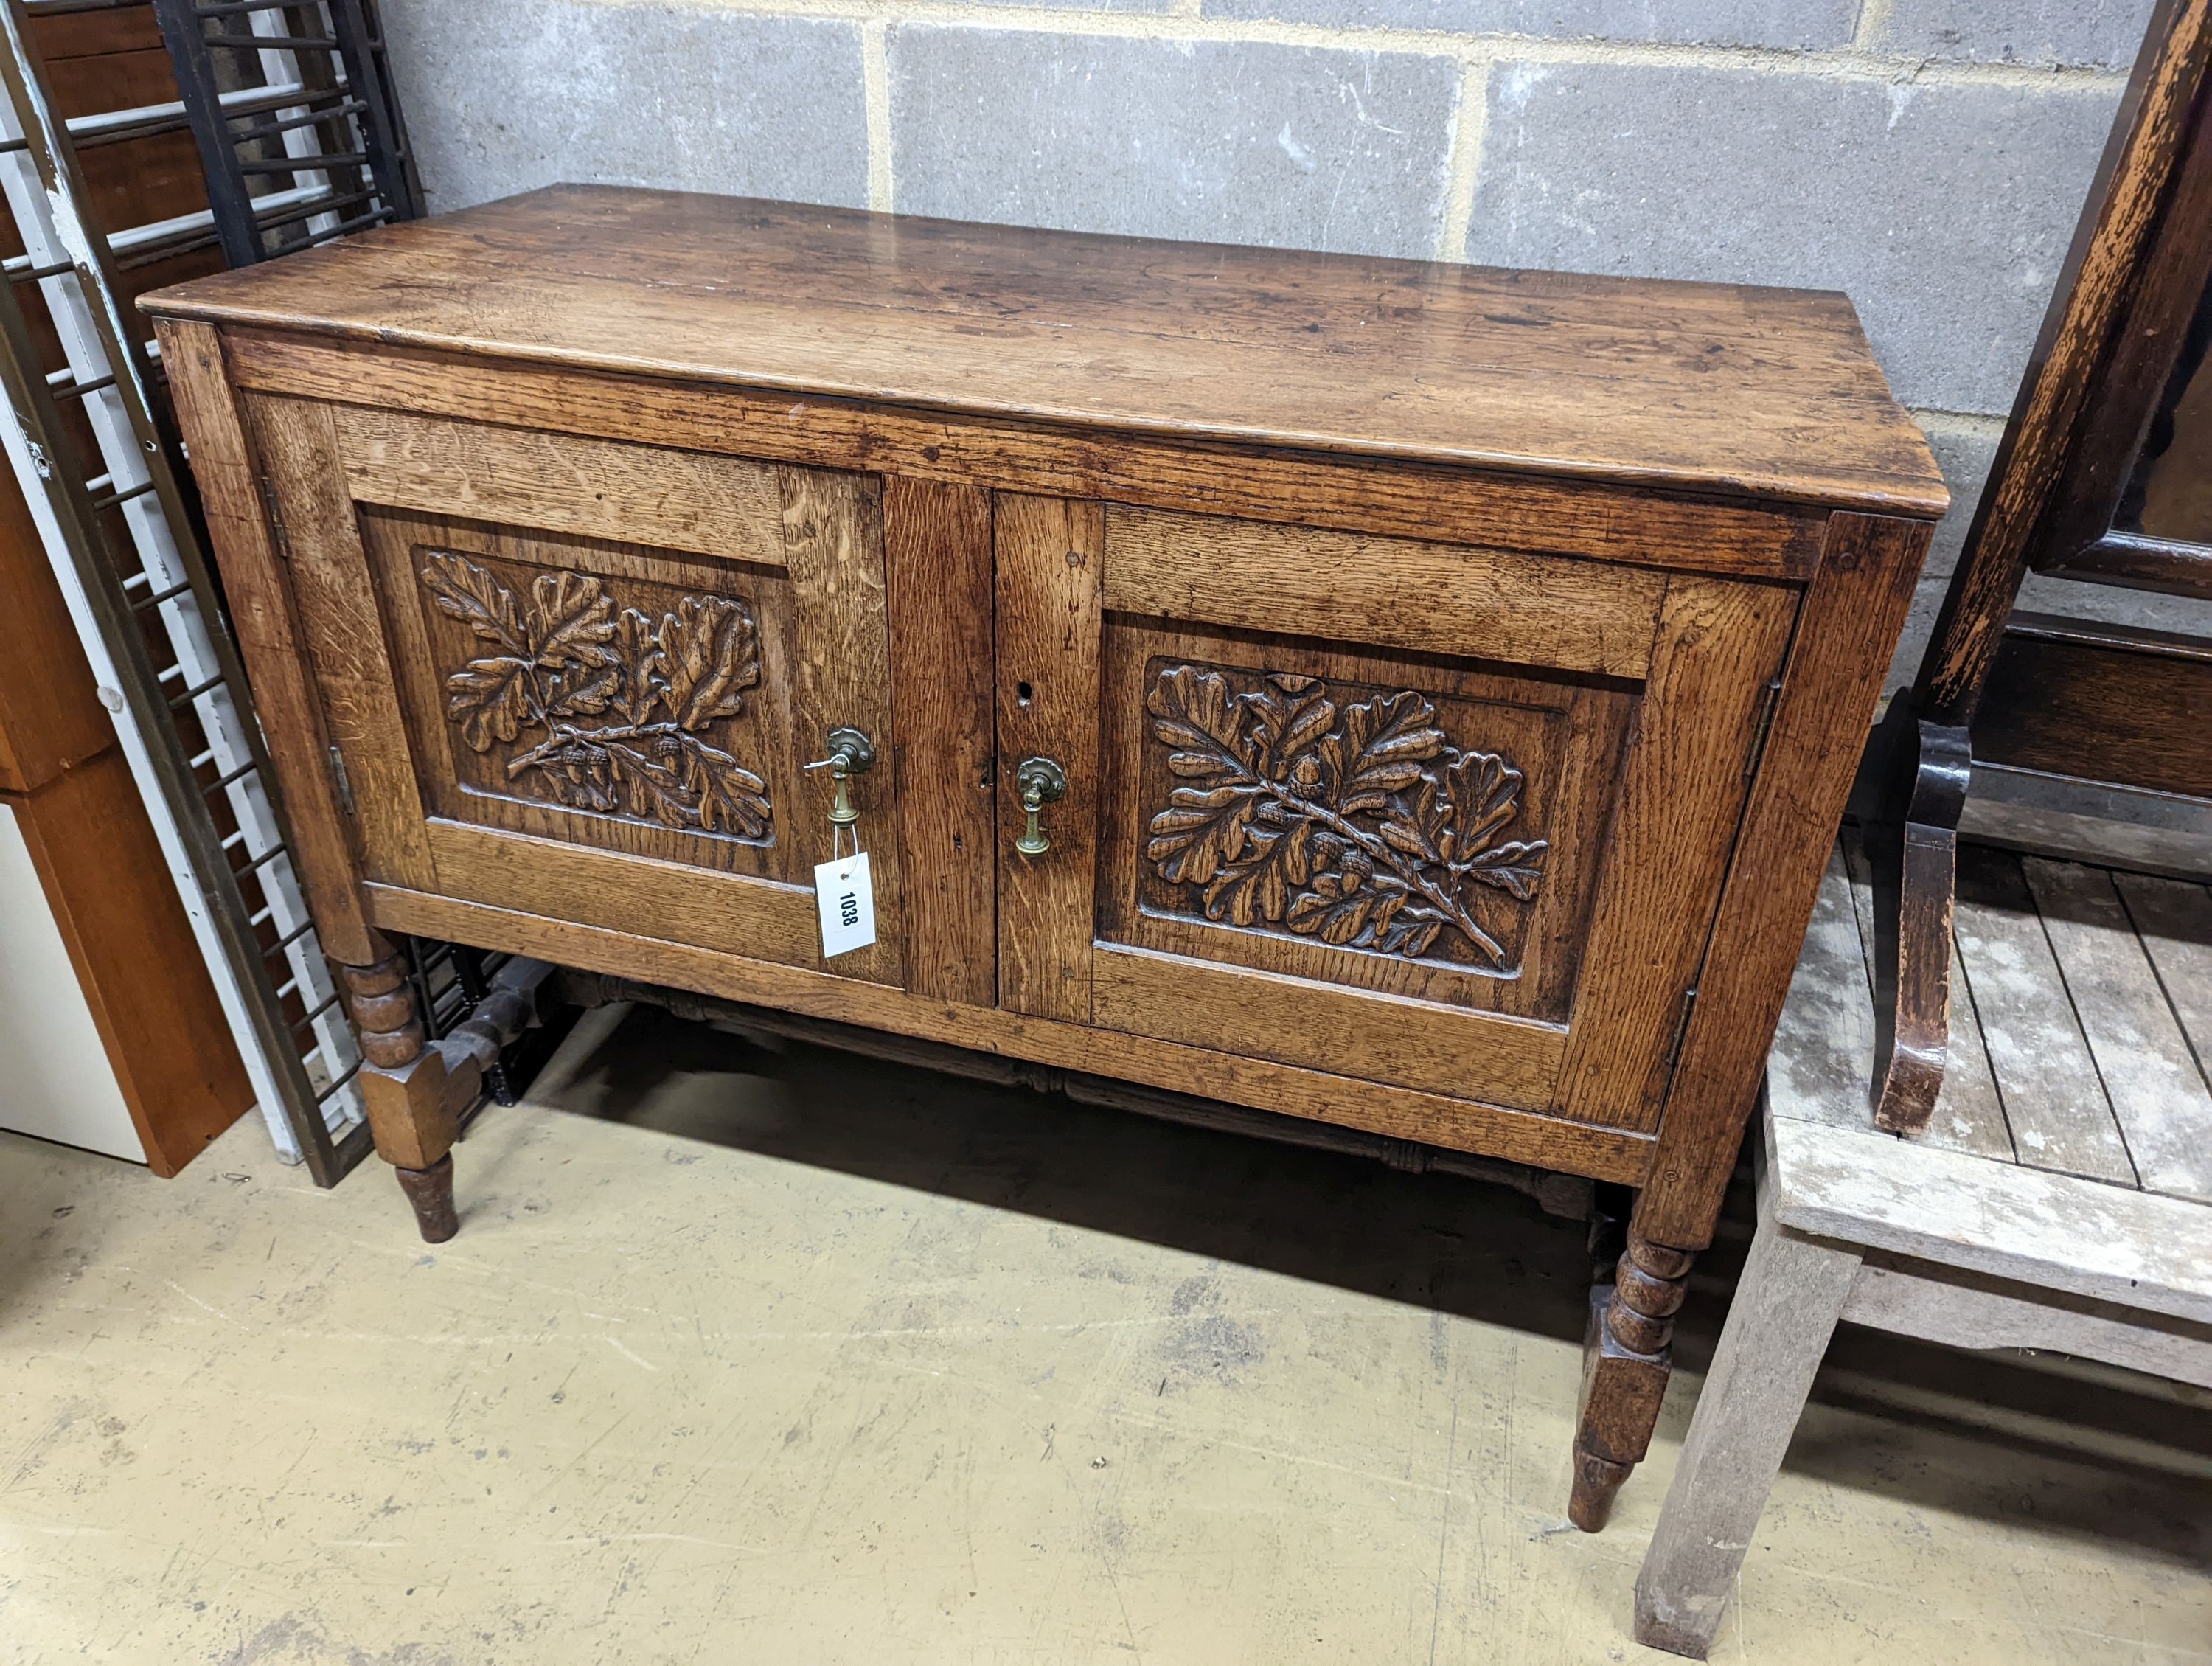 An early 20th century Arts & Crafts oak two door cabinet, carved with oak branches, width 100cm, depth 45cm, height 77cm